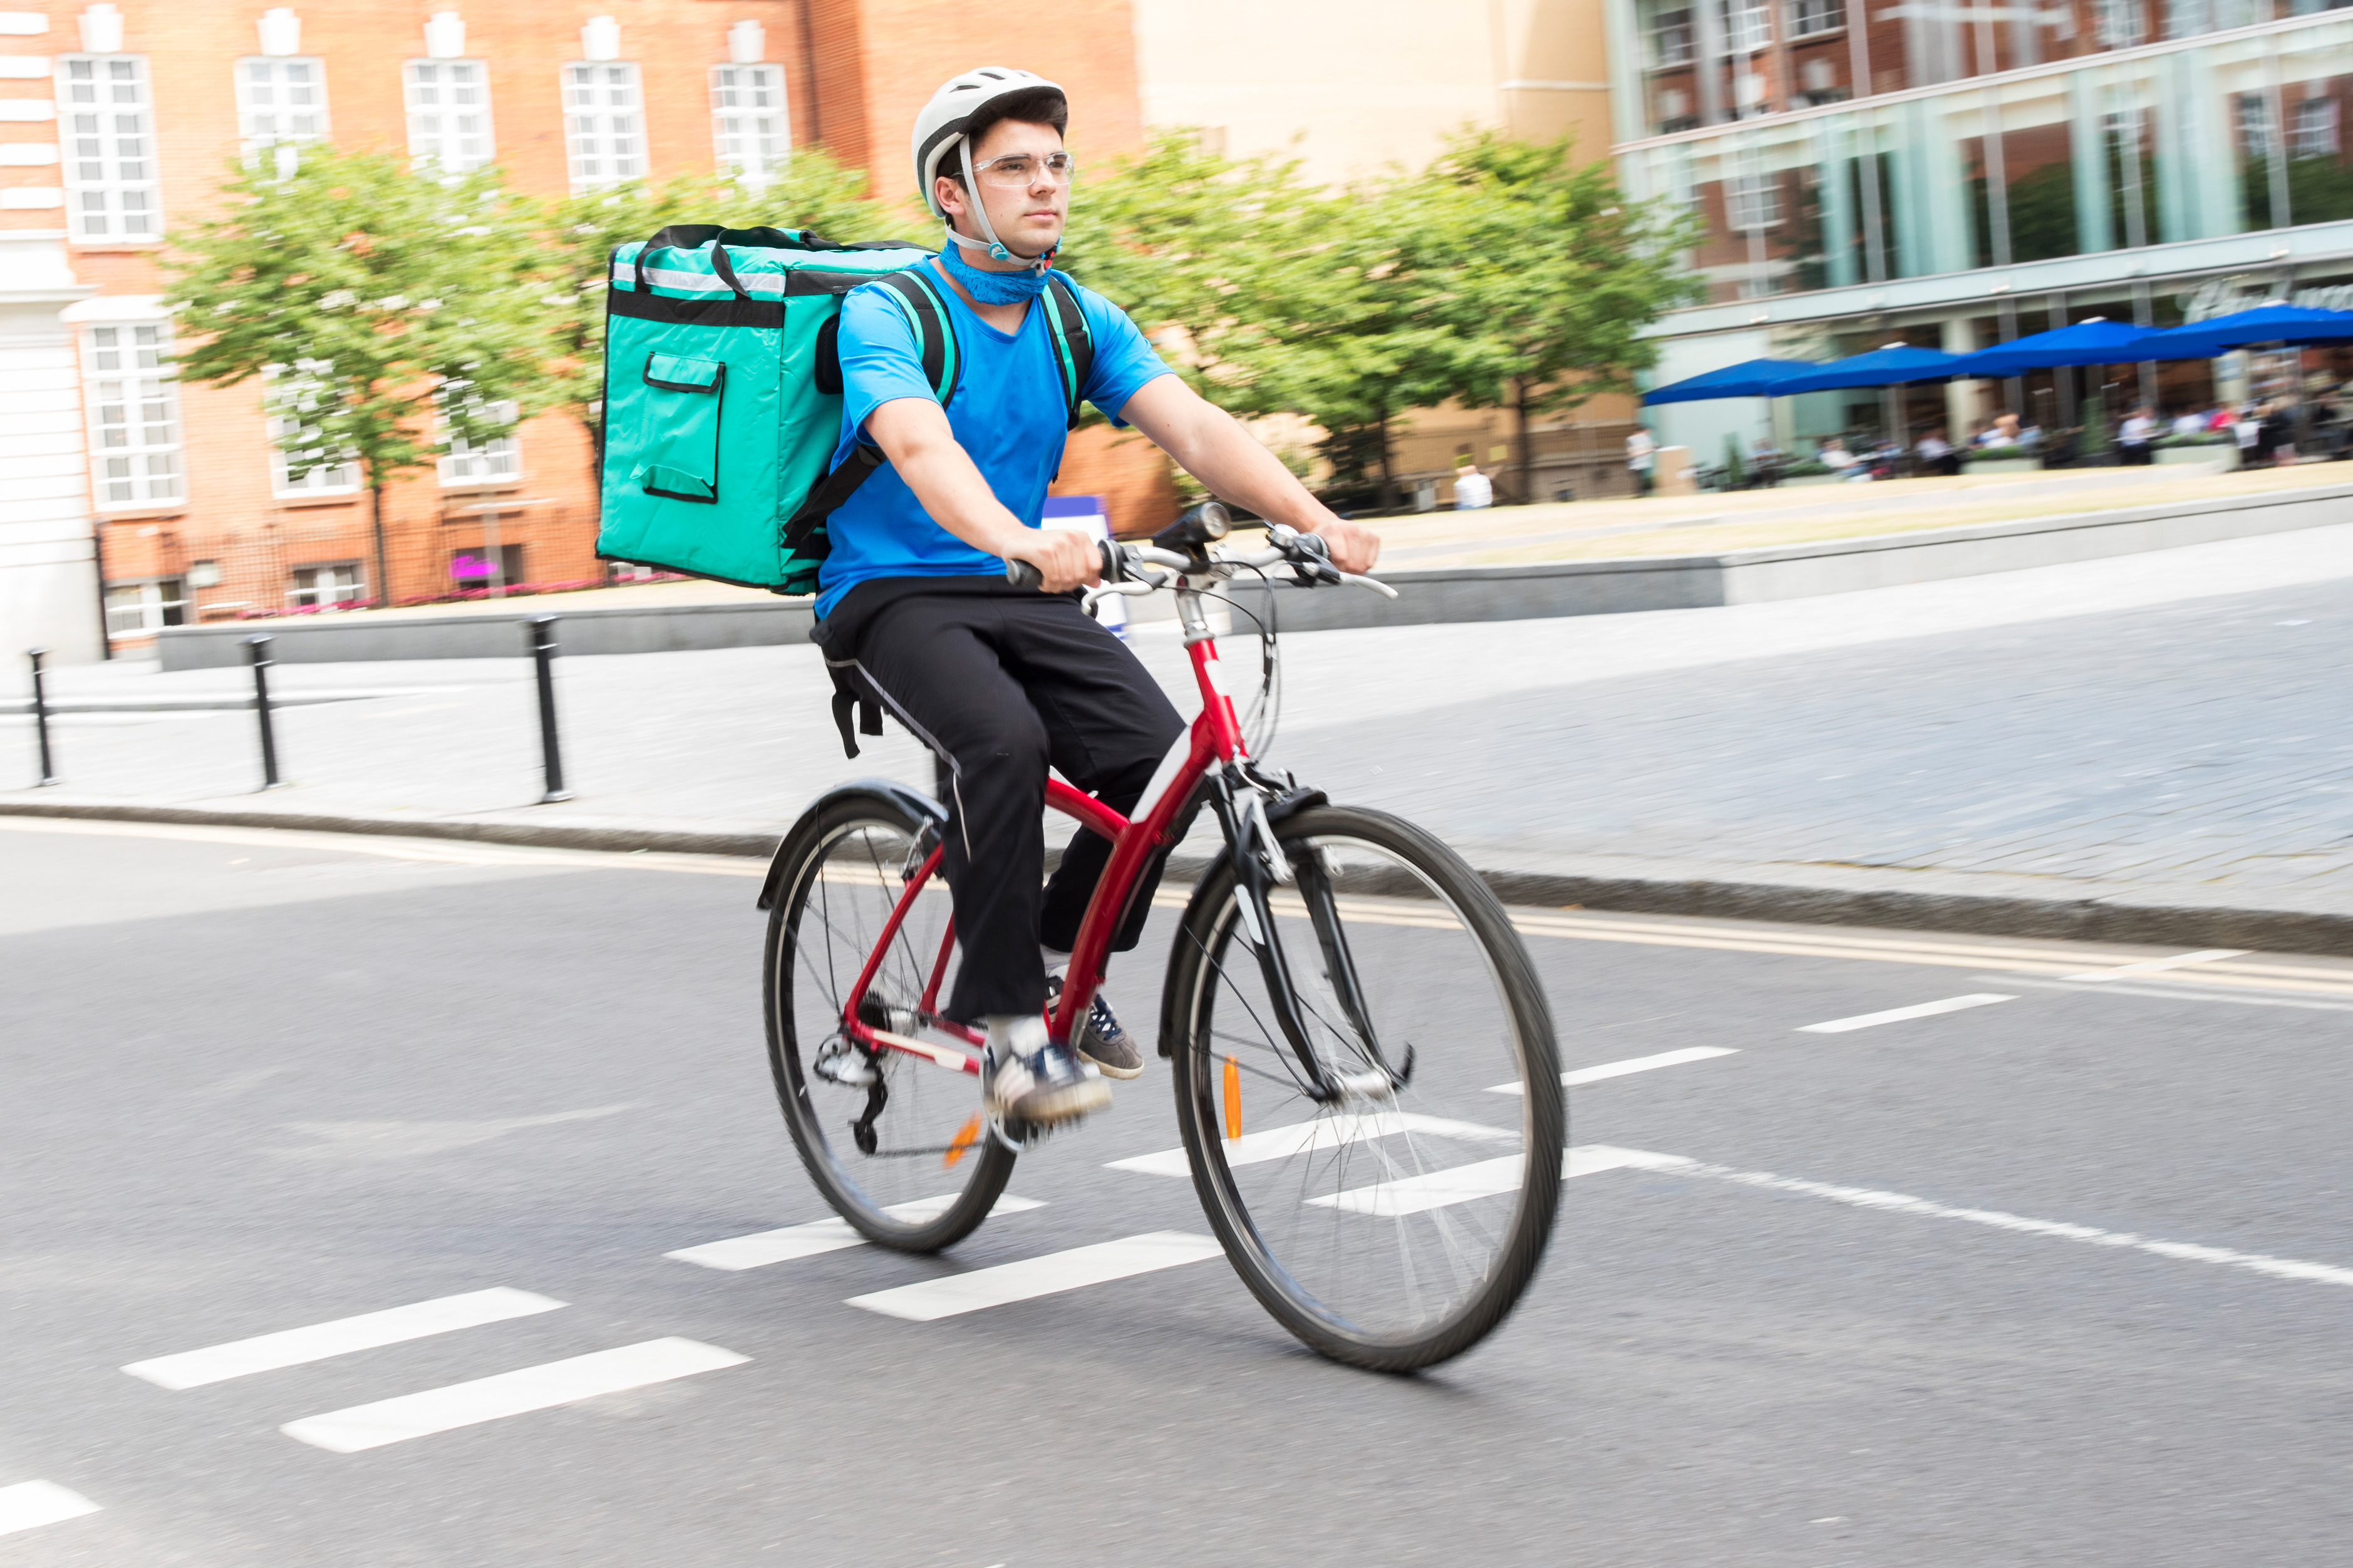 The Gig Economy: Courier On Bicycle Delivering Food In City